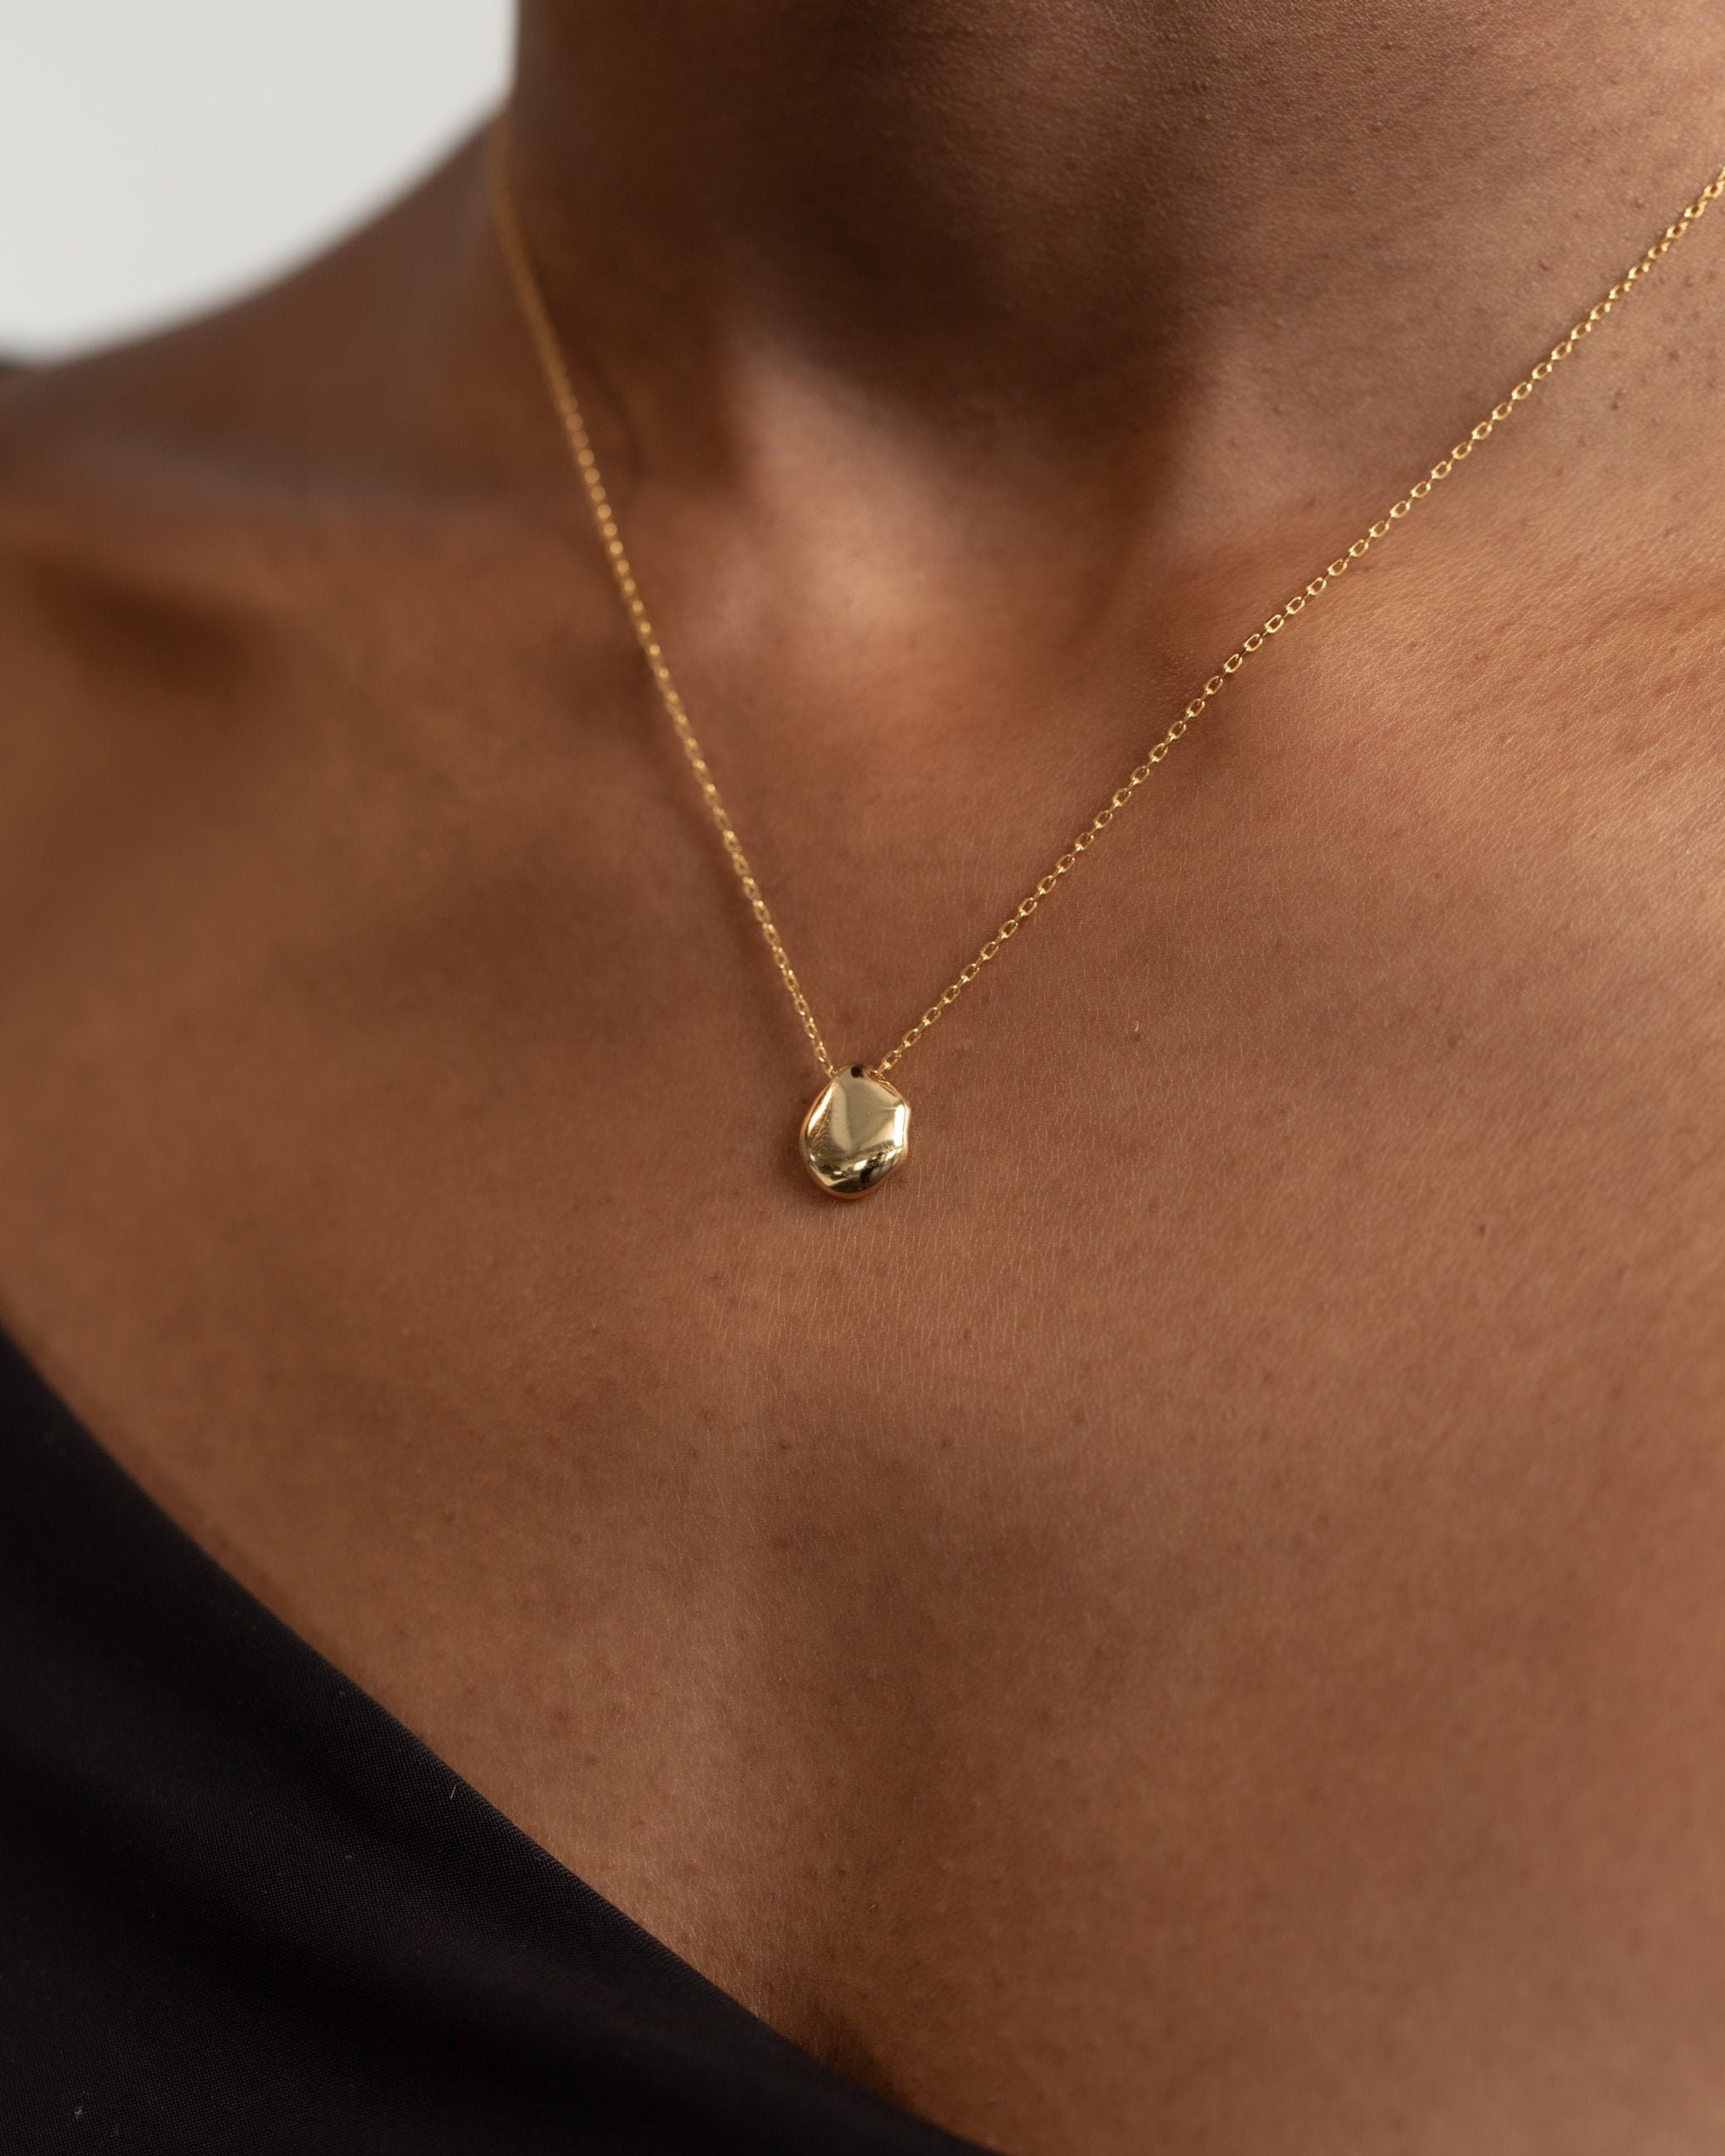 AMELIA Dainty Minimalist Abstract Pebble Pendant Necklace W/ 925 Gold  Plated Sterling Silver Boho Style Gold Organic Pendant Necklace 